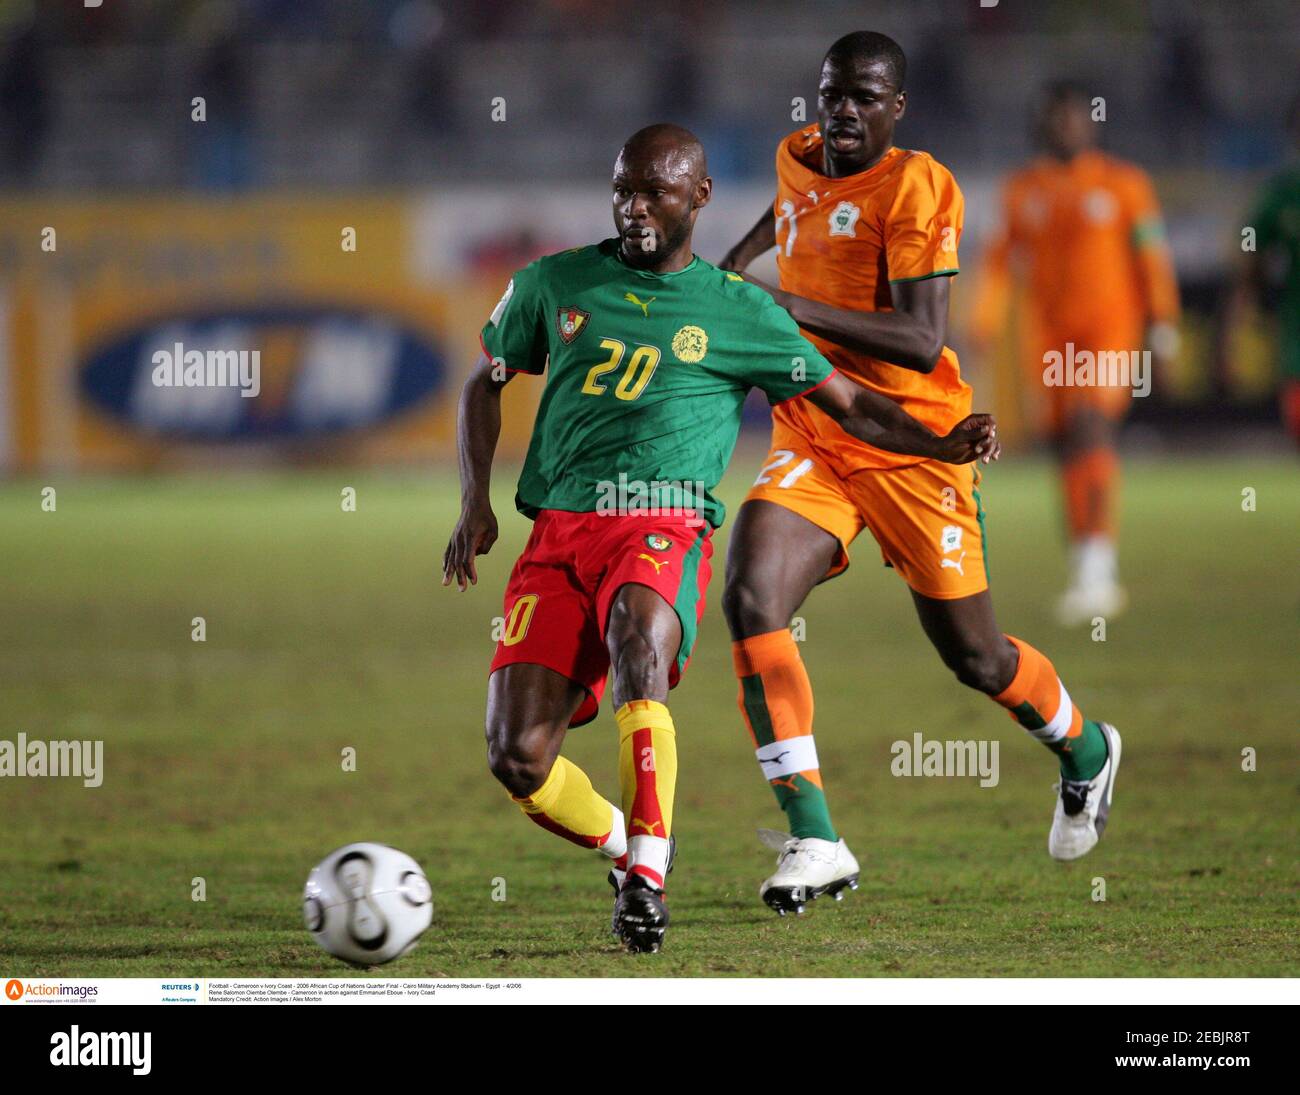 Football - Cameroon v Ivory Coast - 2006 African Cup of Nations Quarter  Final - Cairo Military Academy Stadium - Egypt - 4/2/06 Rene Salomon Oiembe  Olembe - Cameroon in action against